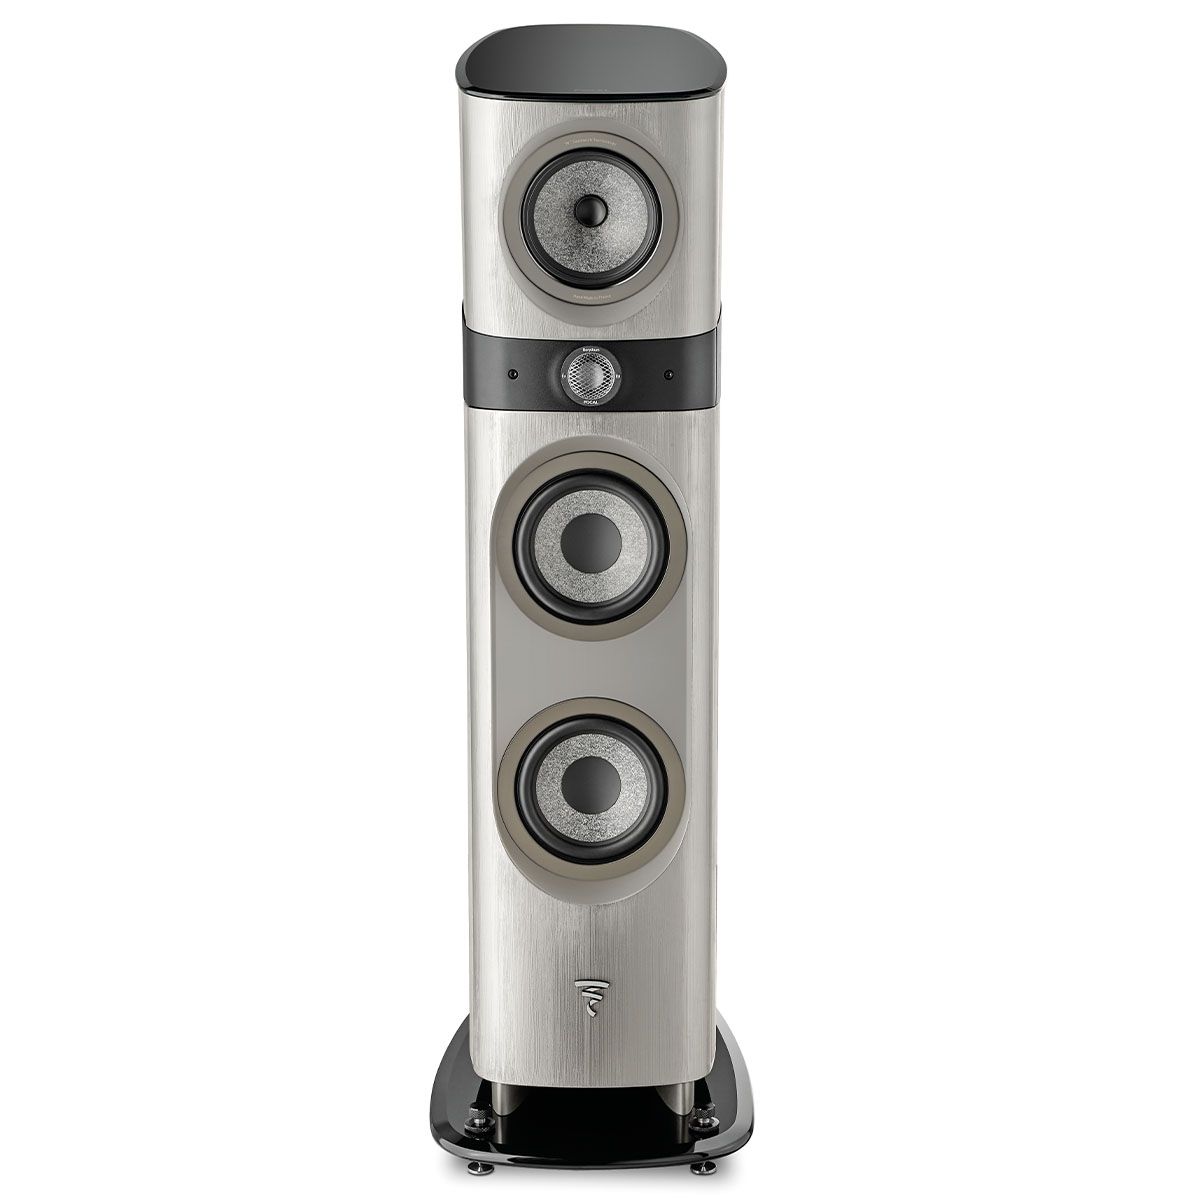 Focal Naim 10th Anniversary Edition Bundle - front view of single Focal speaker without grille